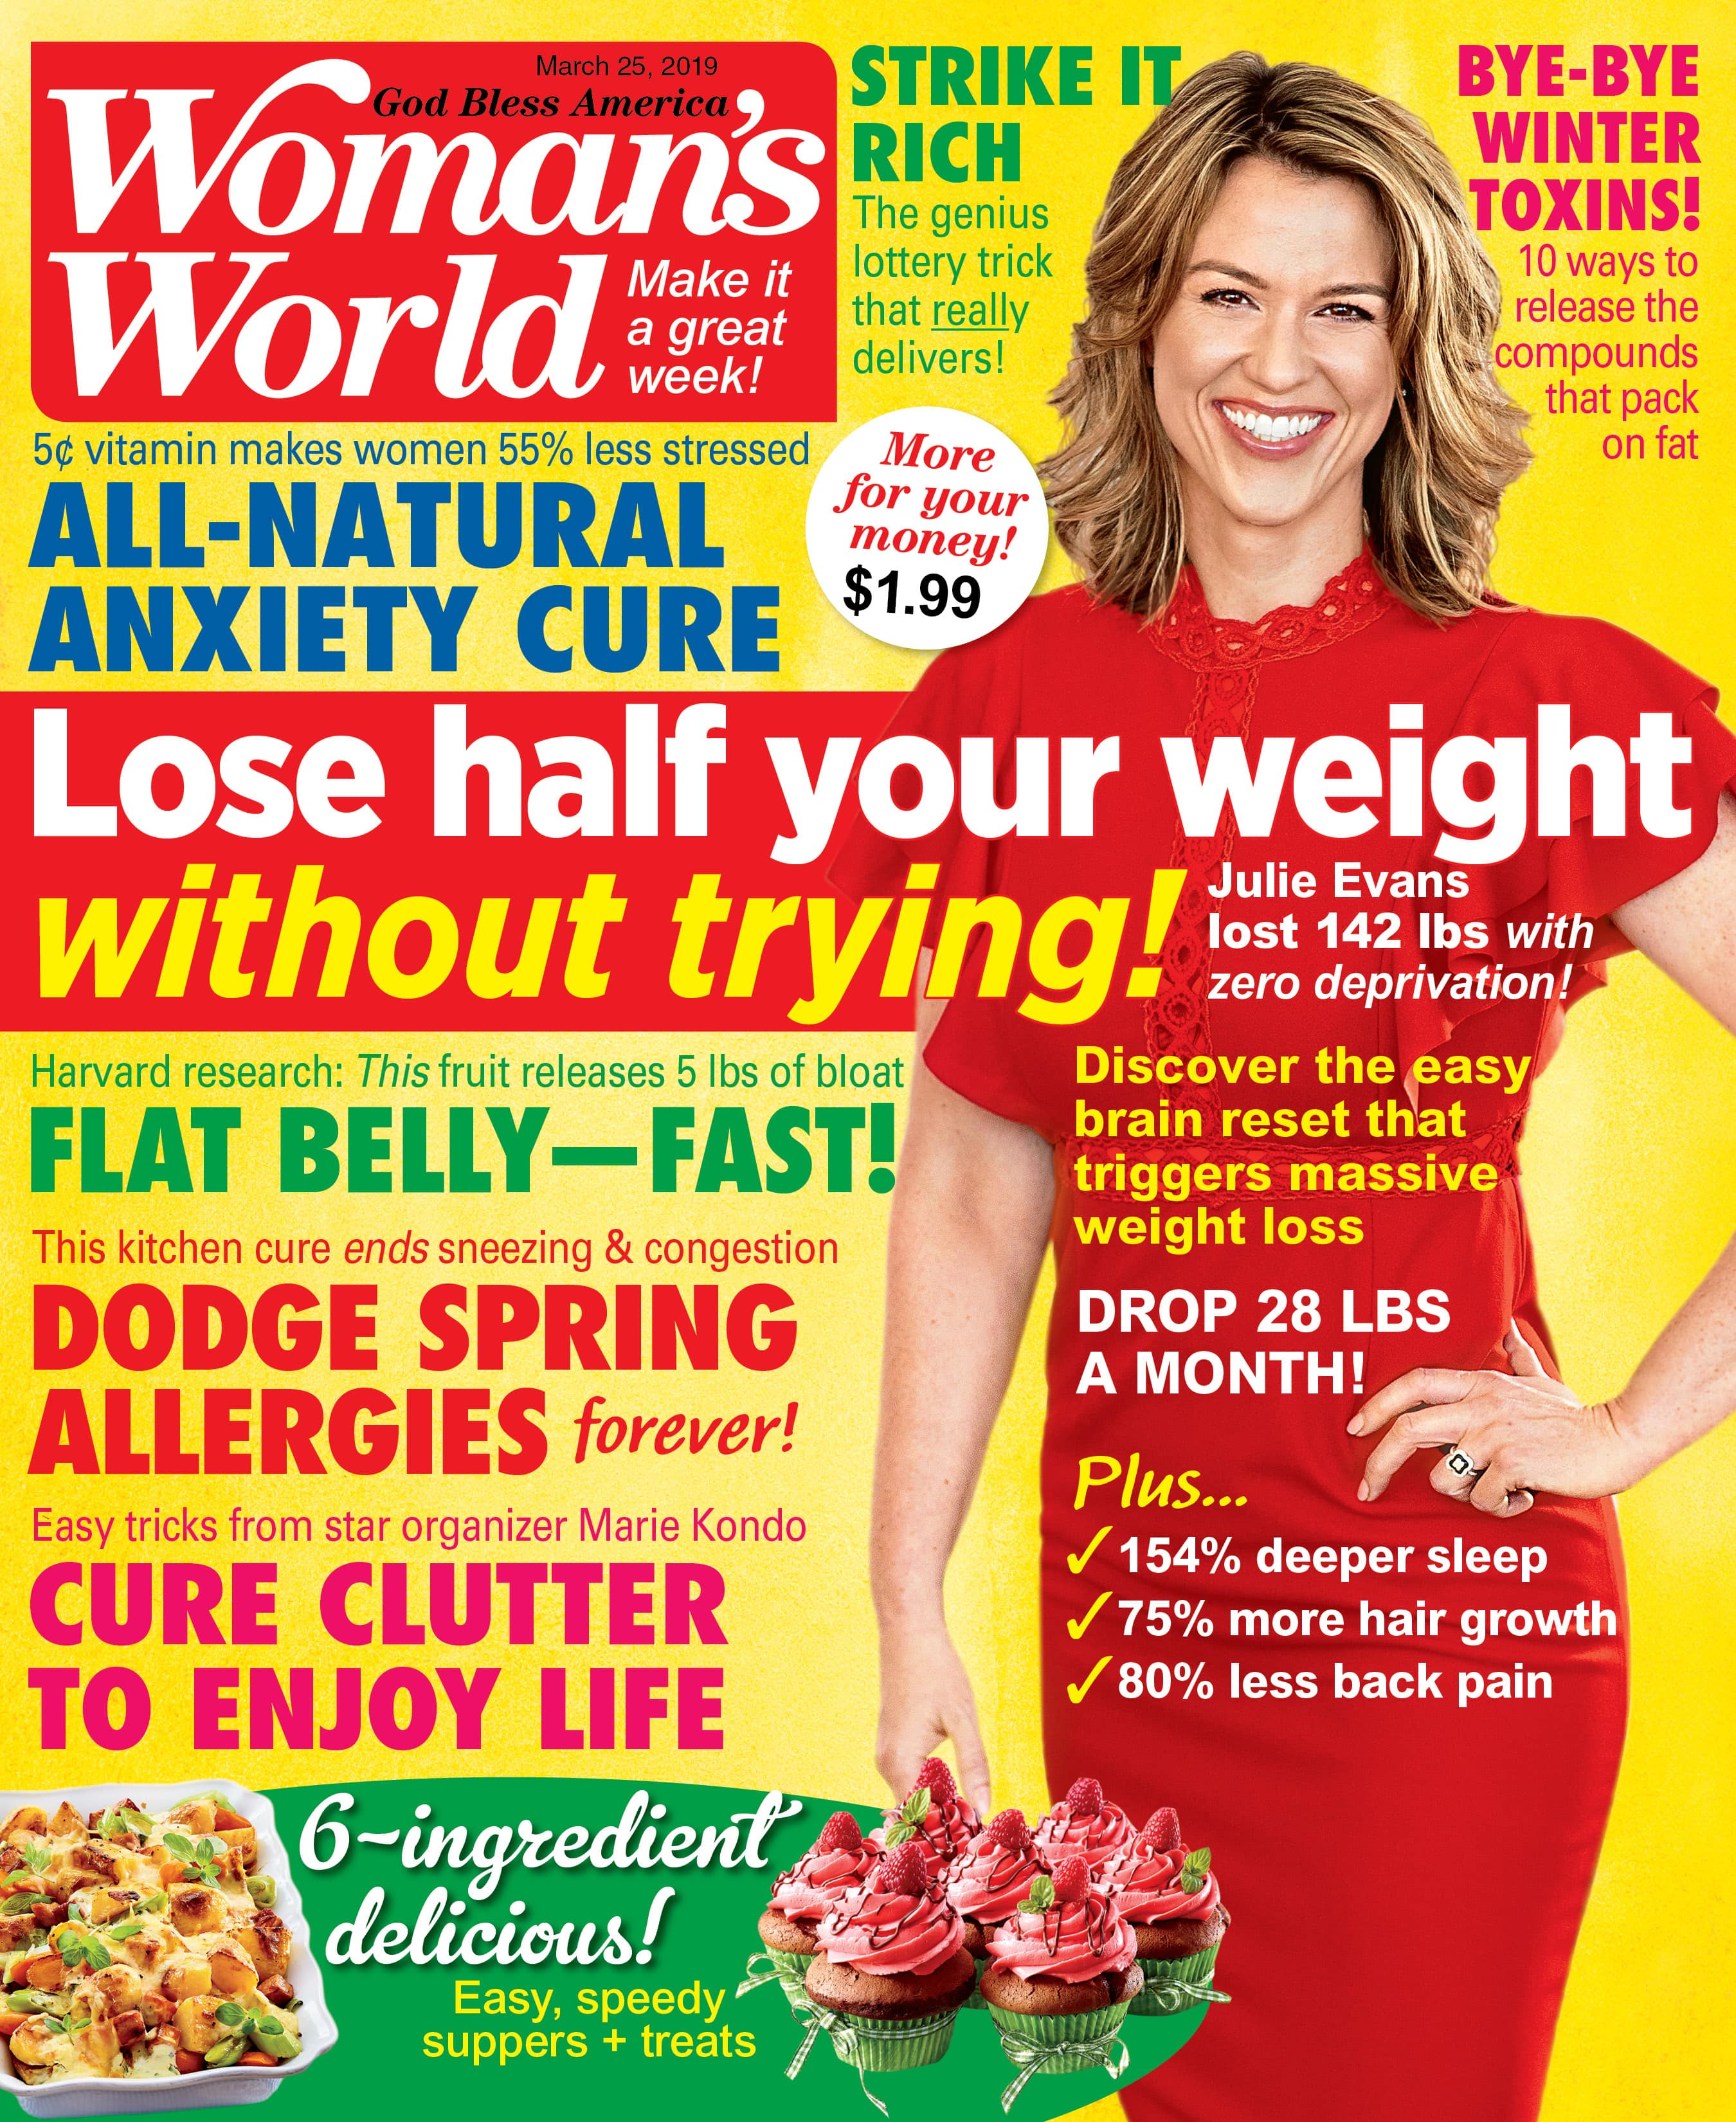 Woman's World Weight Loss Hypnosis Story